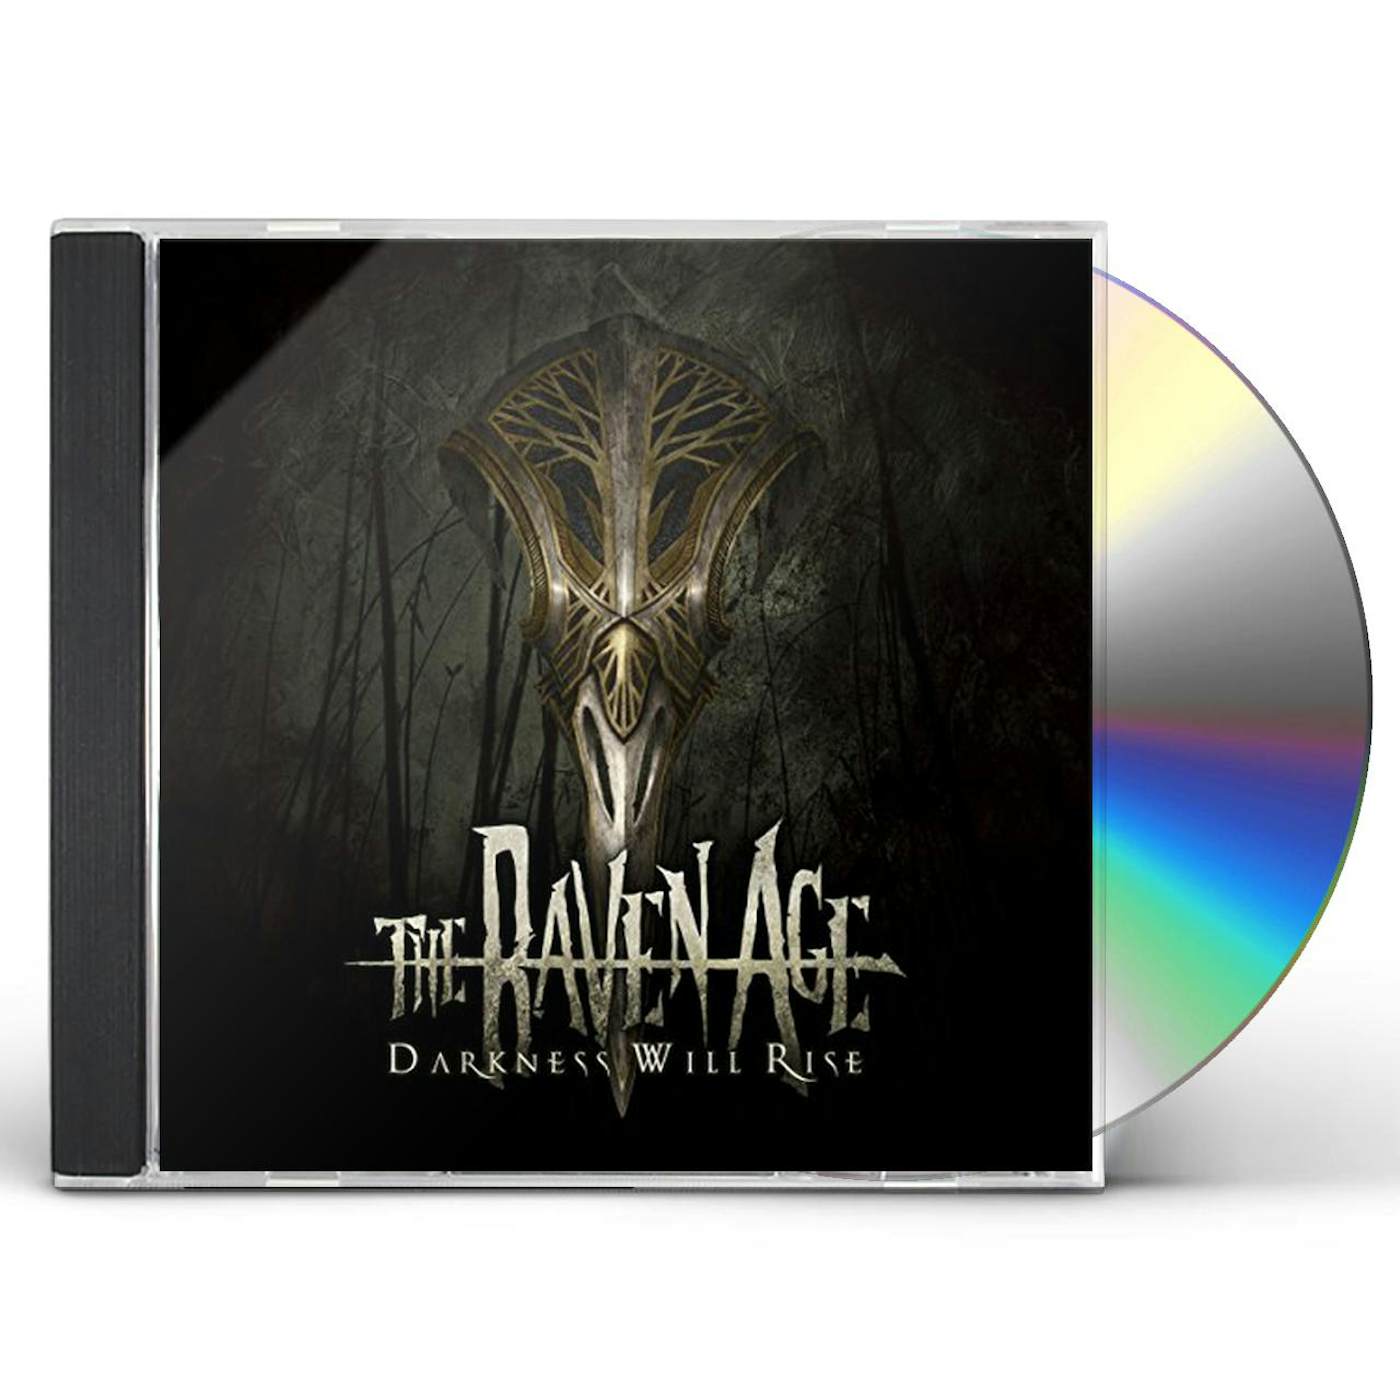 The Raven Age DARKNESS WILL RISE CD